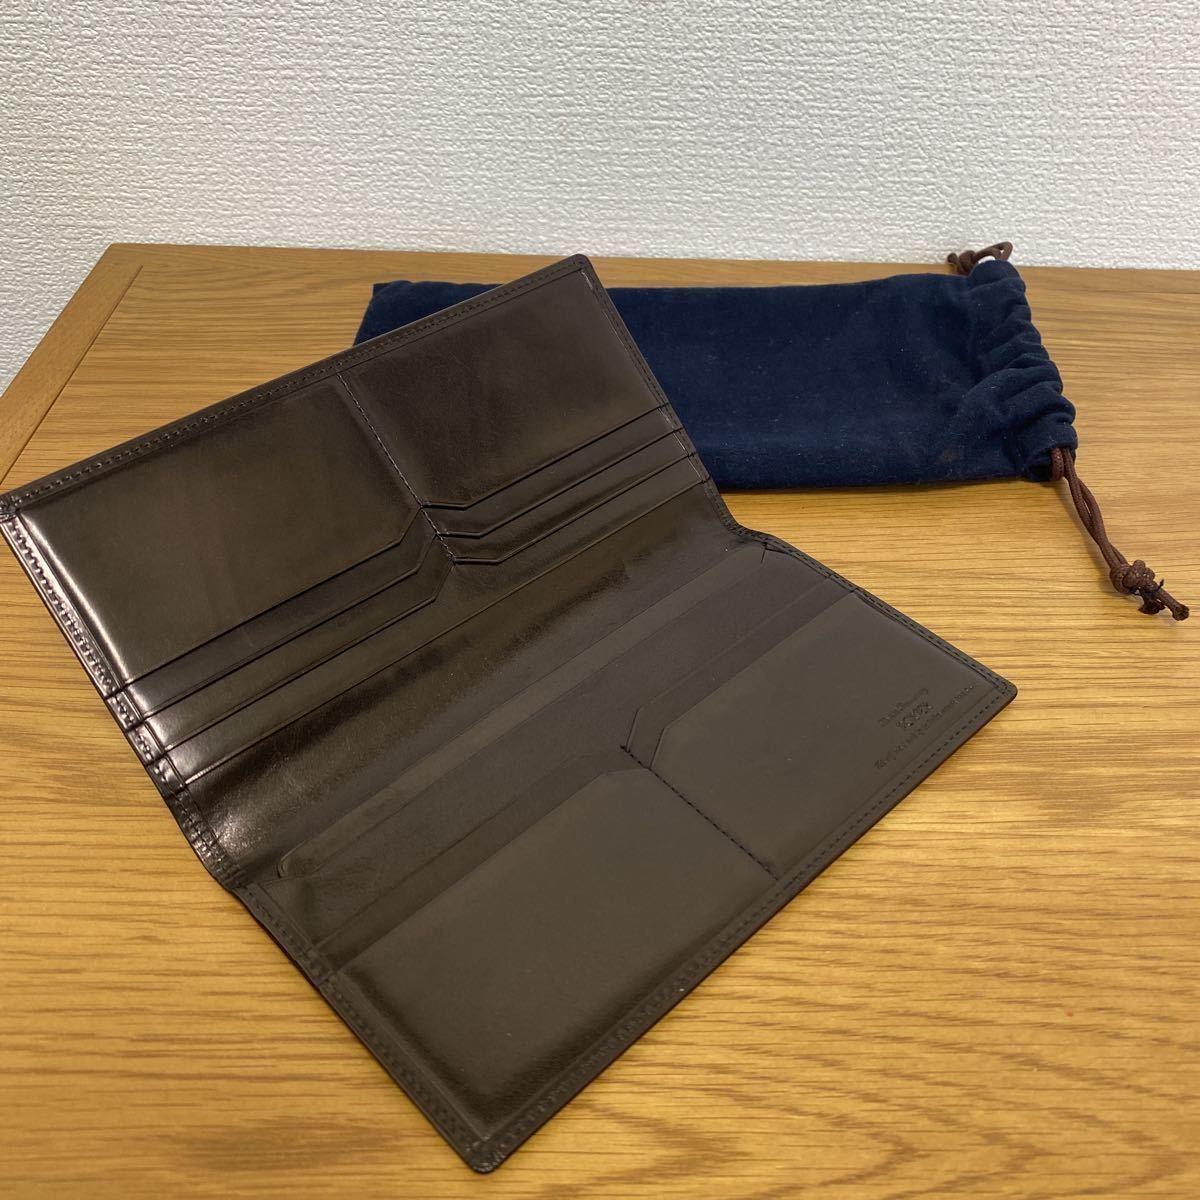  regular price :28050 jpy [ ultimate beautiful goods * that day shipping ]* Porter *f less ko* real leather made long wallet (. inserting )* black color * Yoshida bag * made in Japan [ tube :SKO7]